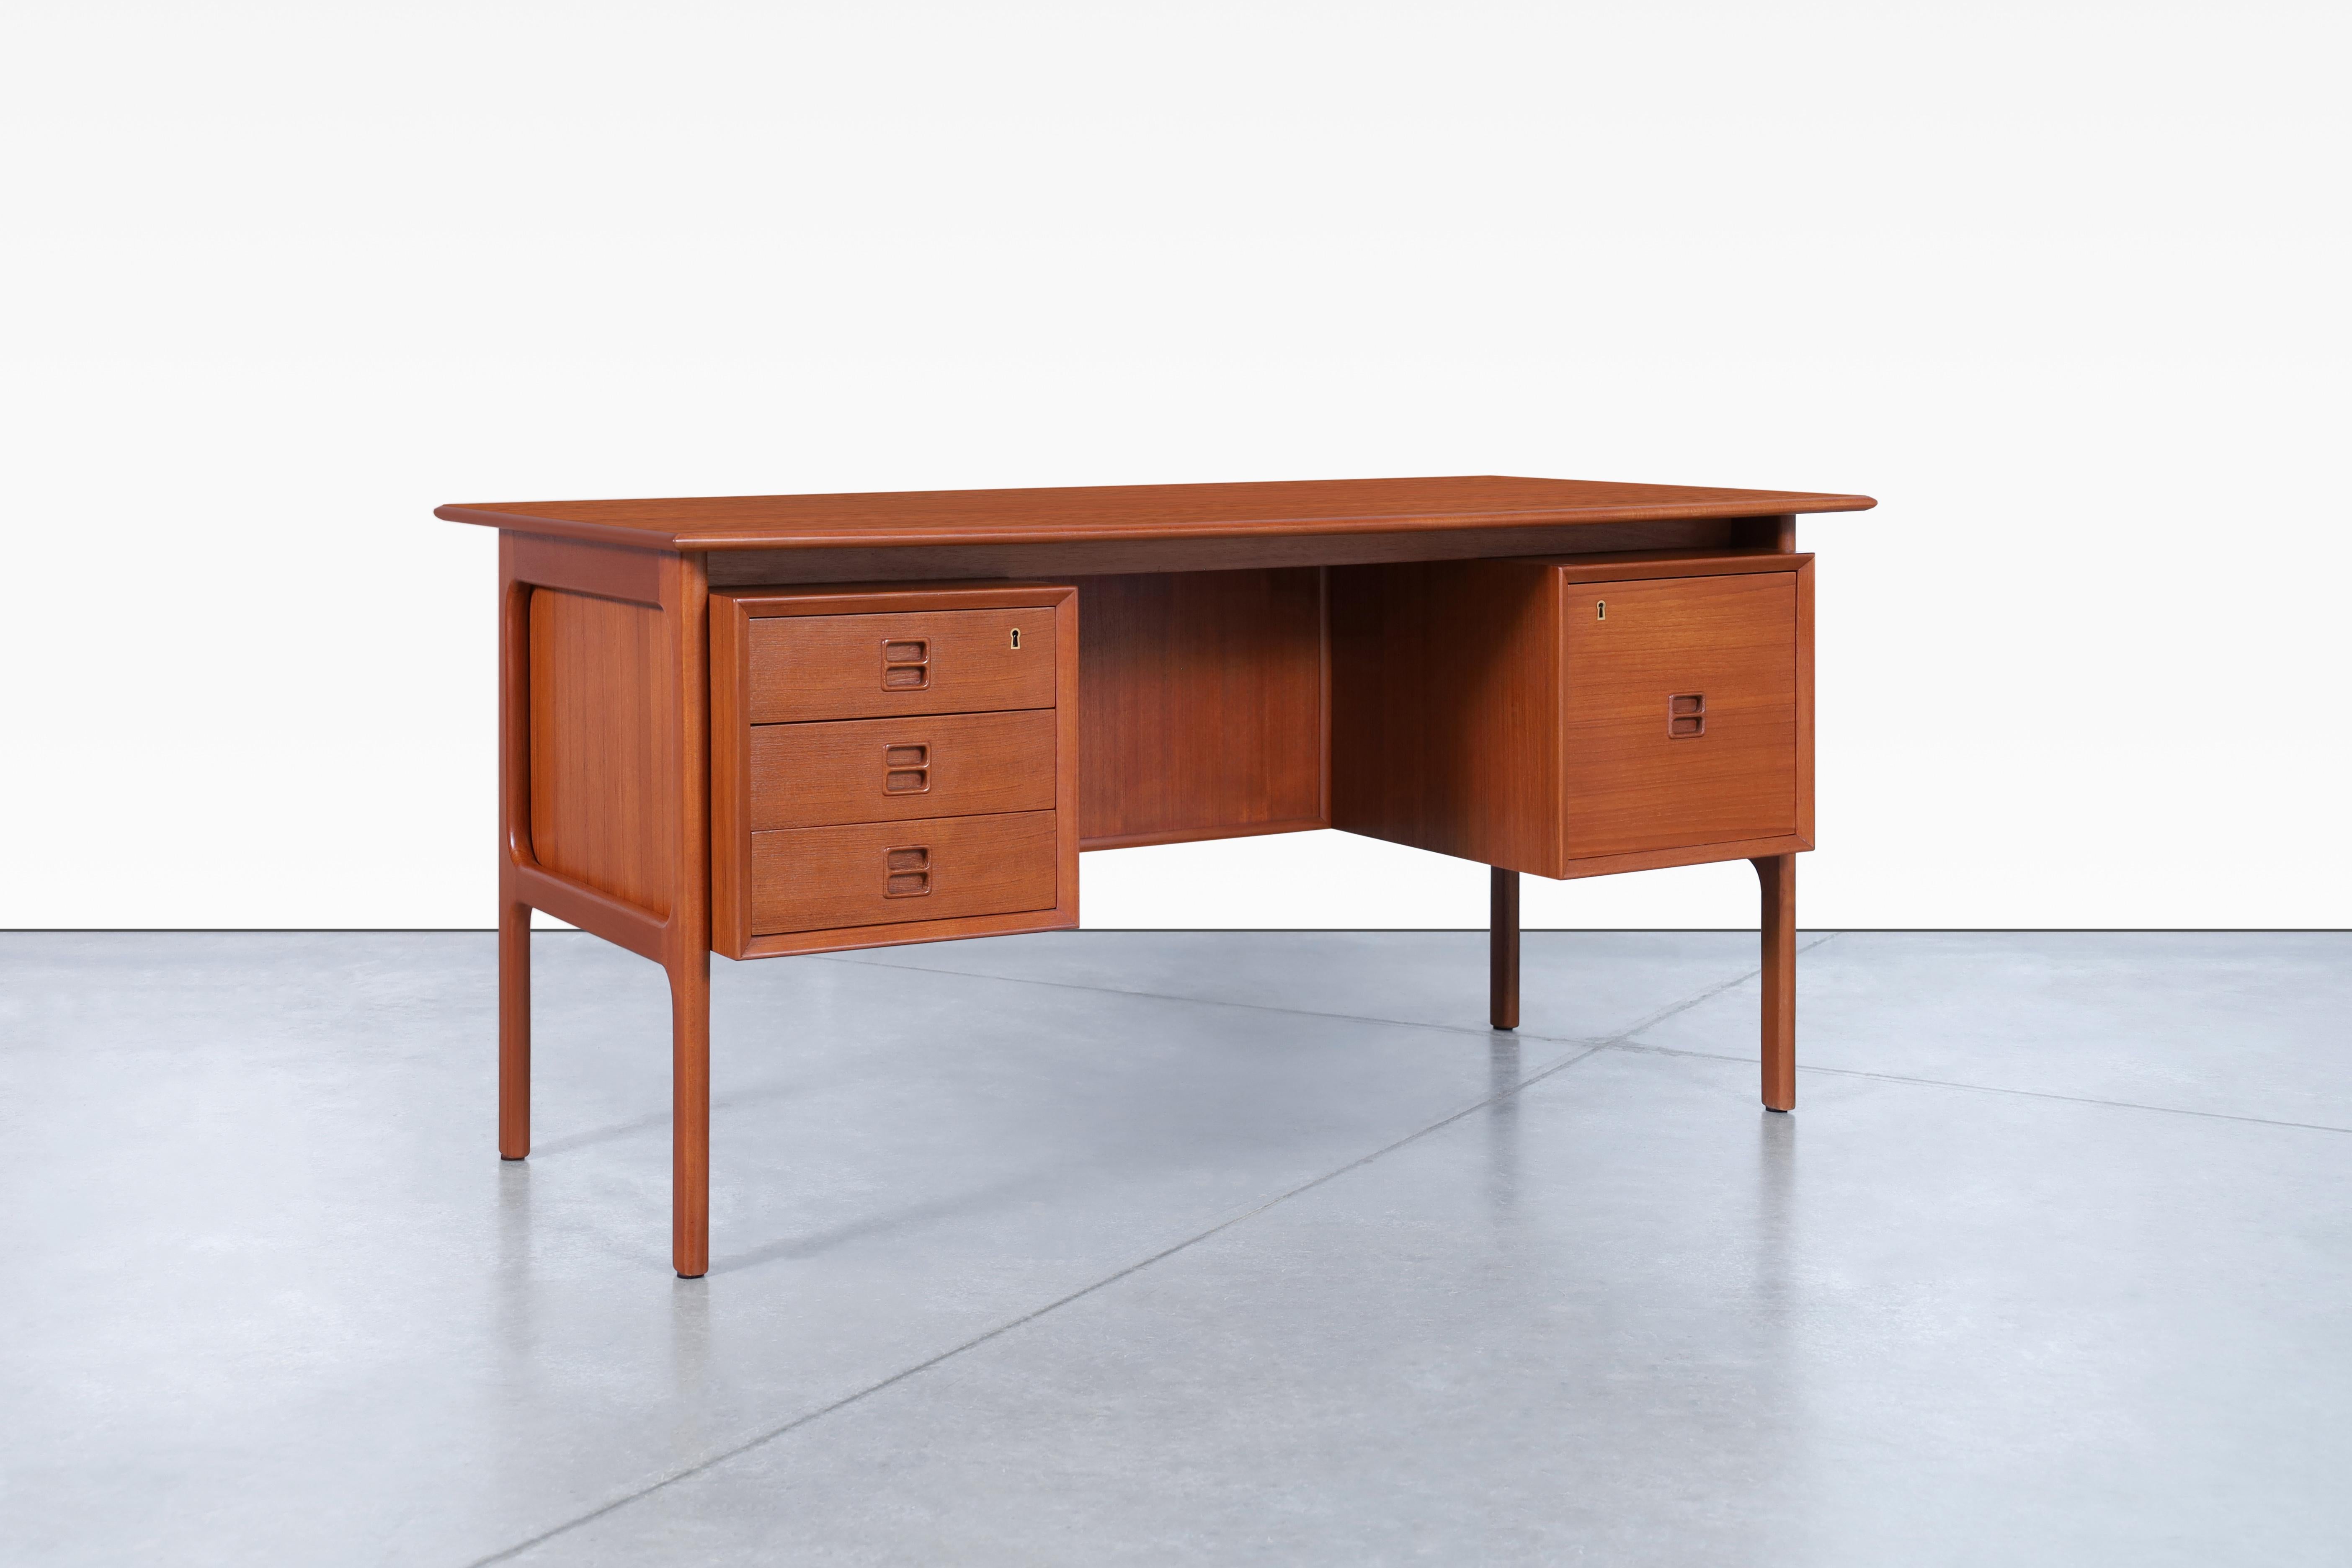 Danish Modern Teak Desk W/ Bookcase by Erik Brouer for Brouer Møbelfabrik In Excellent Condition For Sale In North Hollywood, CA